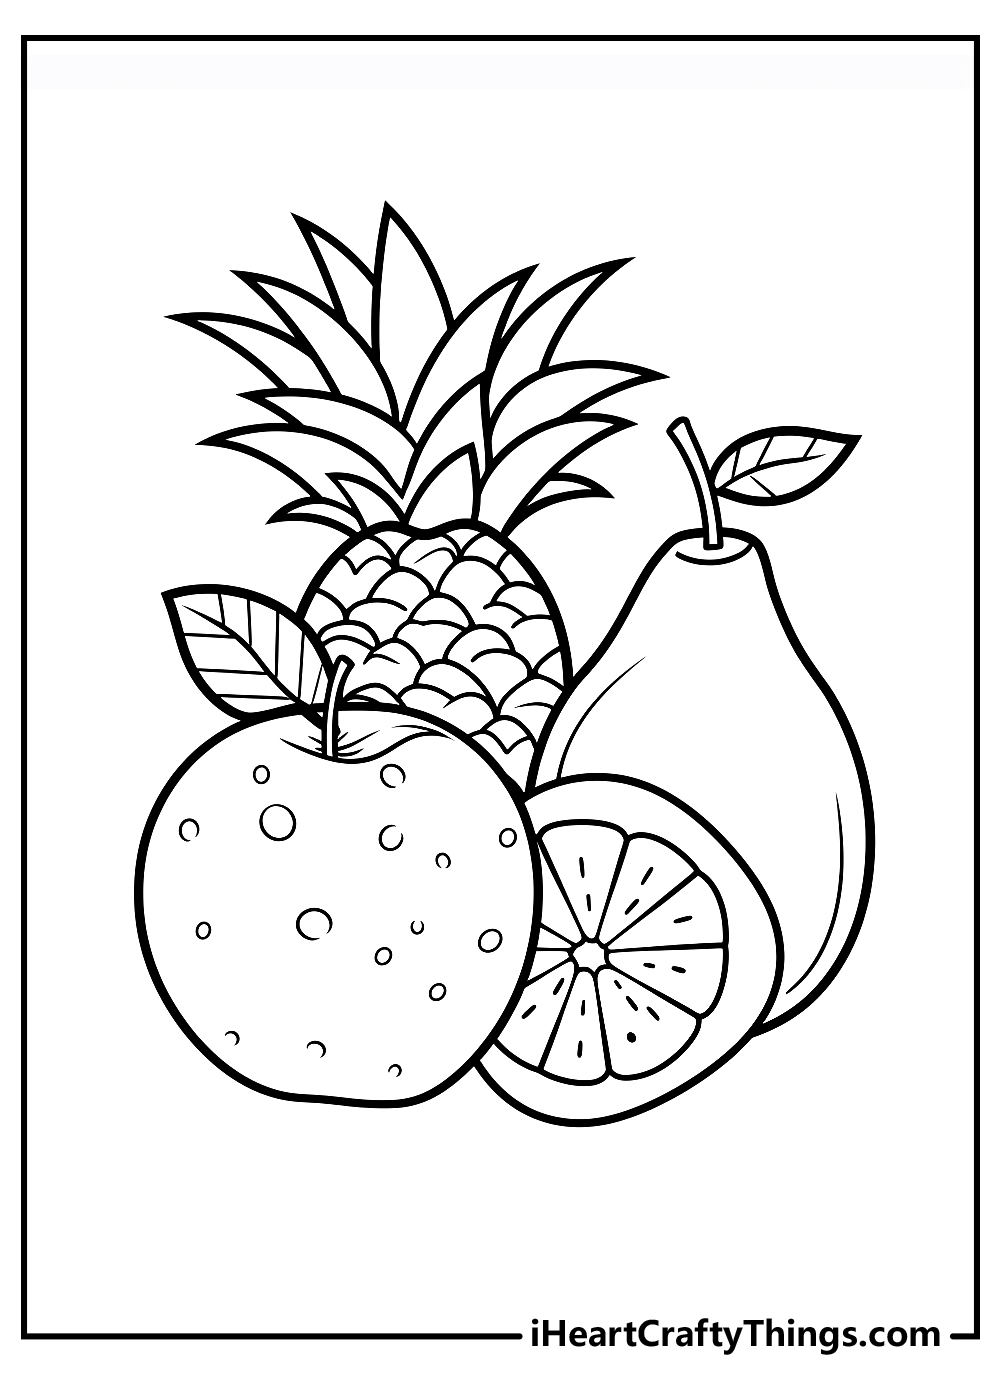 Vegetables Coloring Pages - GetColoringPages.com